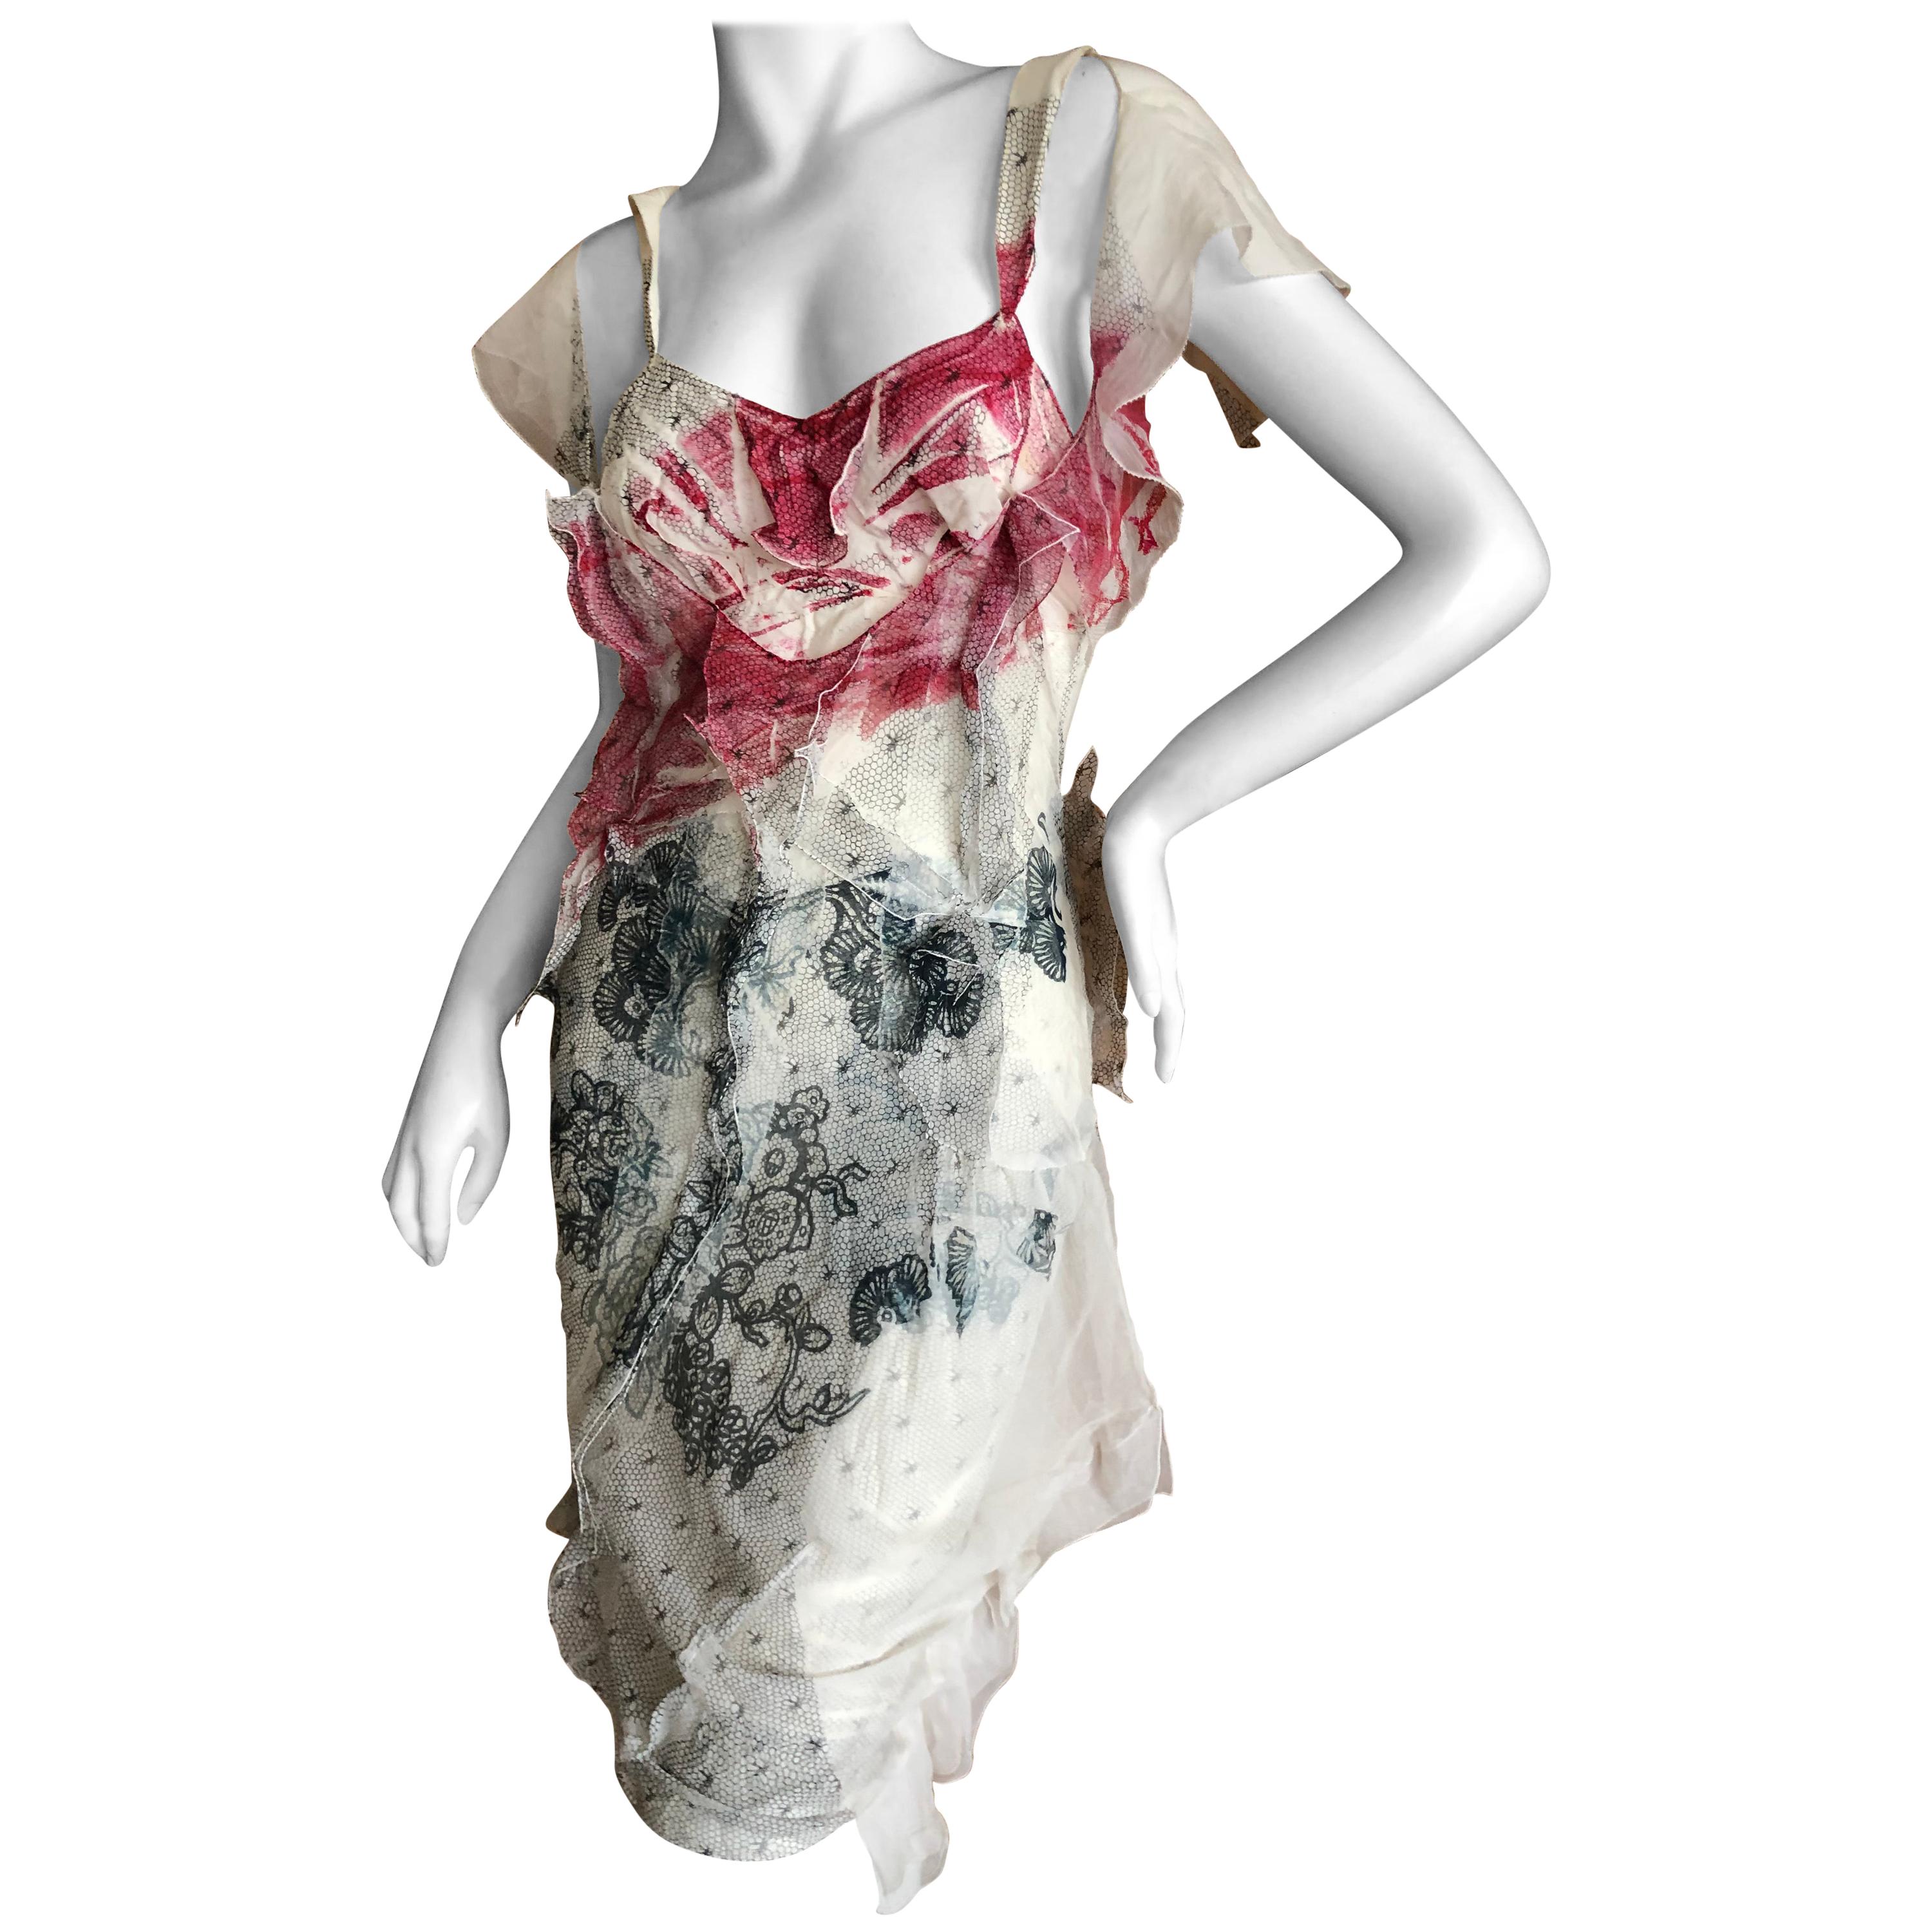 Christian Dior by John Galliano Spring 2006 Silk Mousseline "Bloody" Lace Dress For Sale